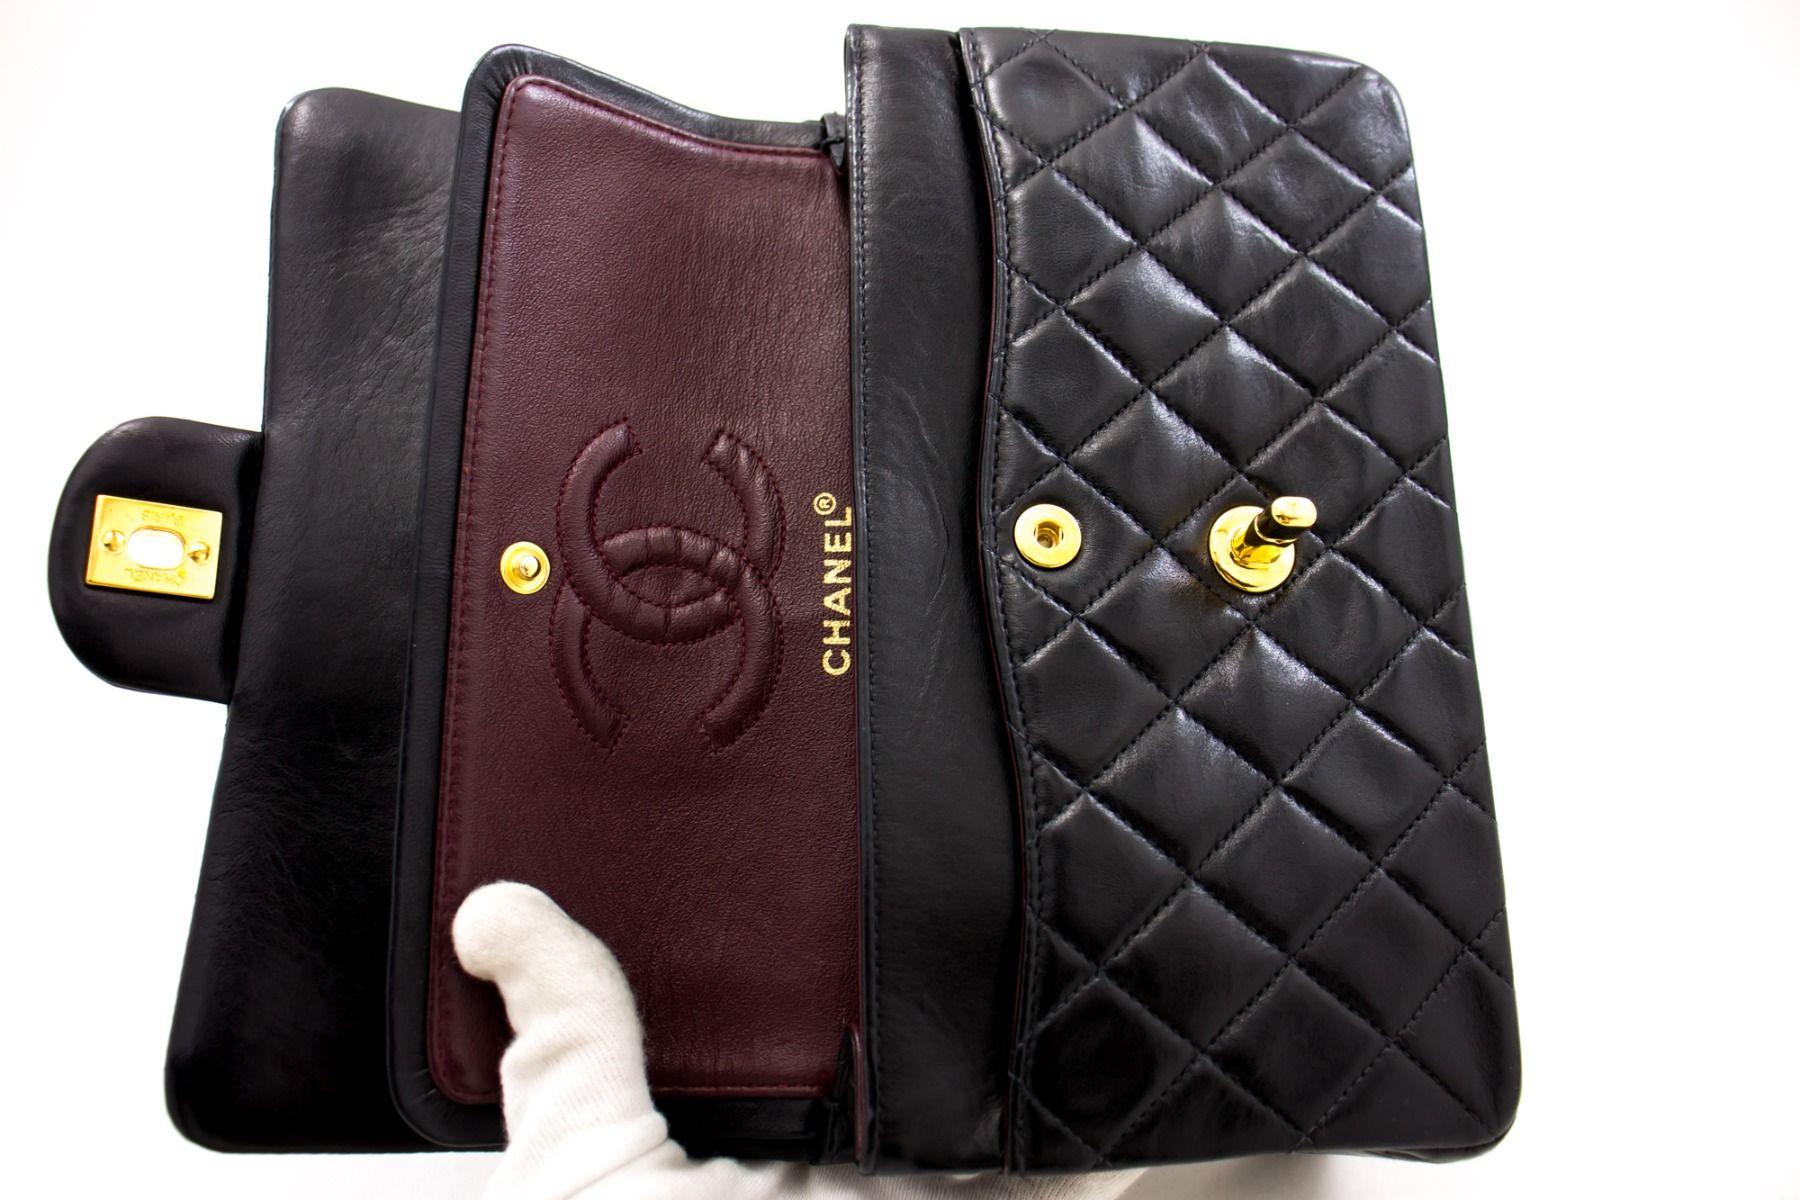 Chanel Small Double Flap Bag In Excellent Condition For Sale In London, GB